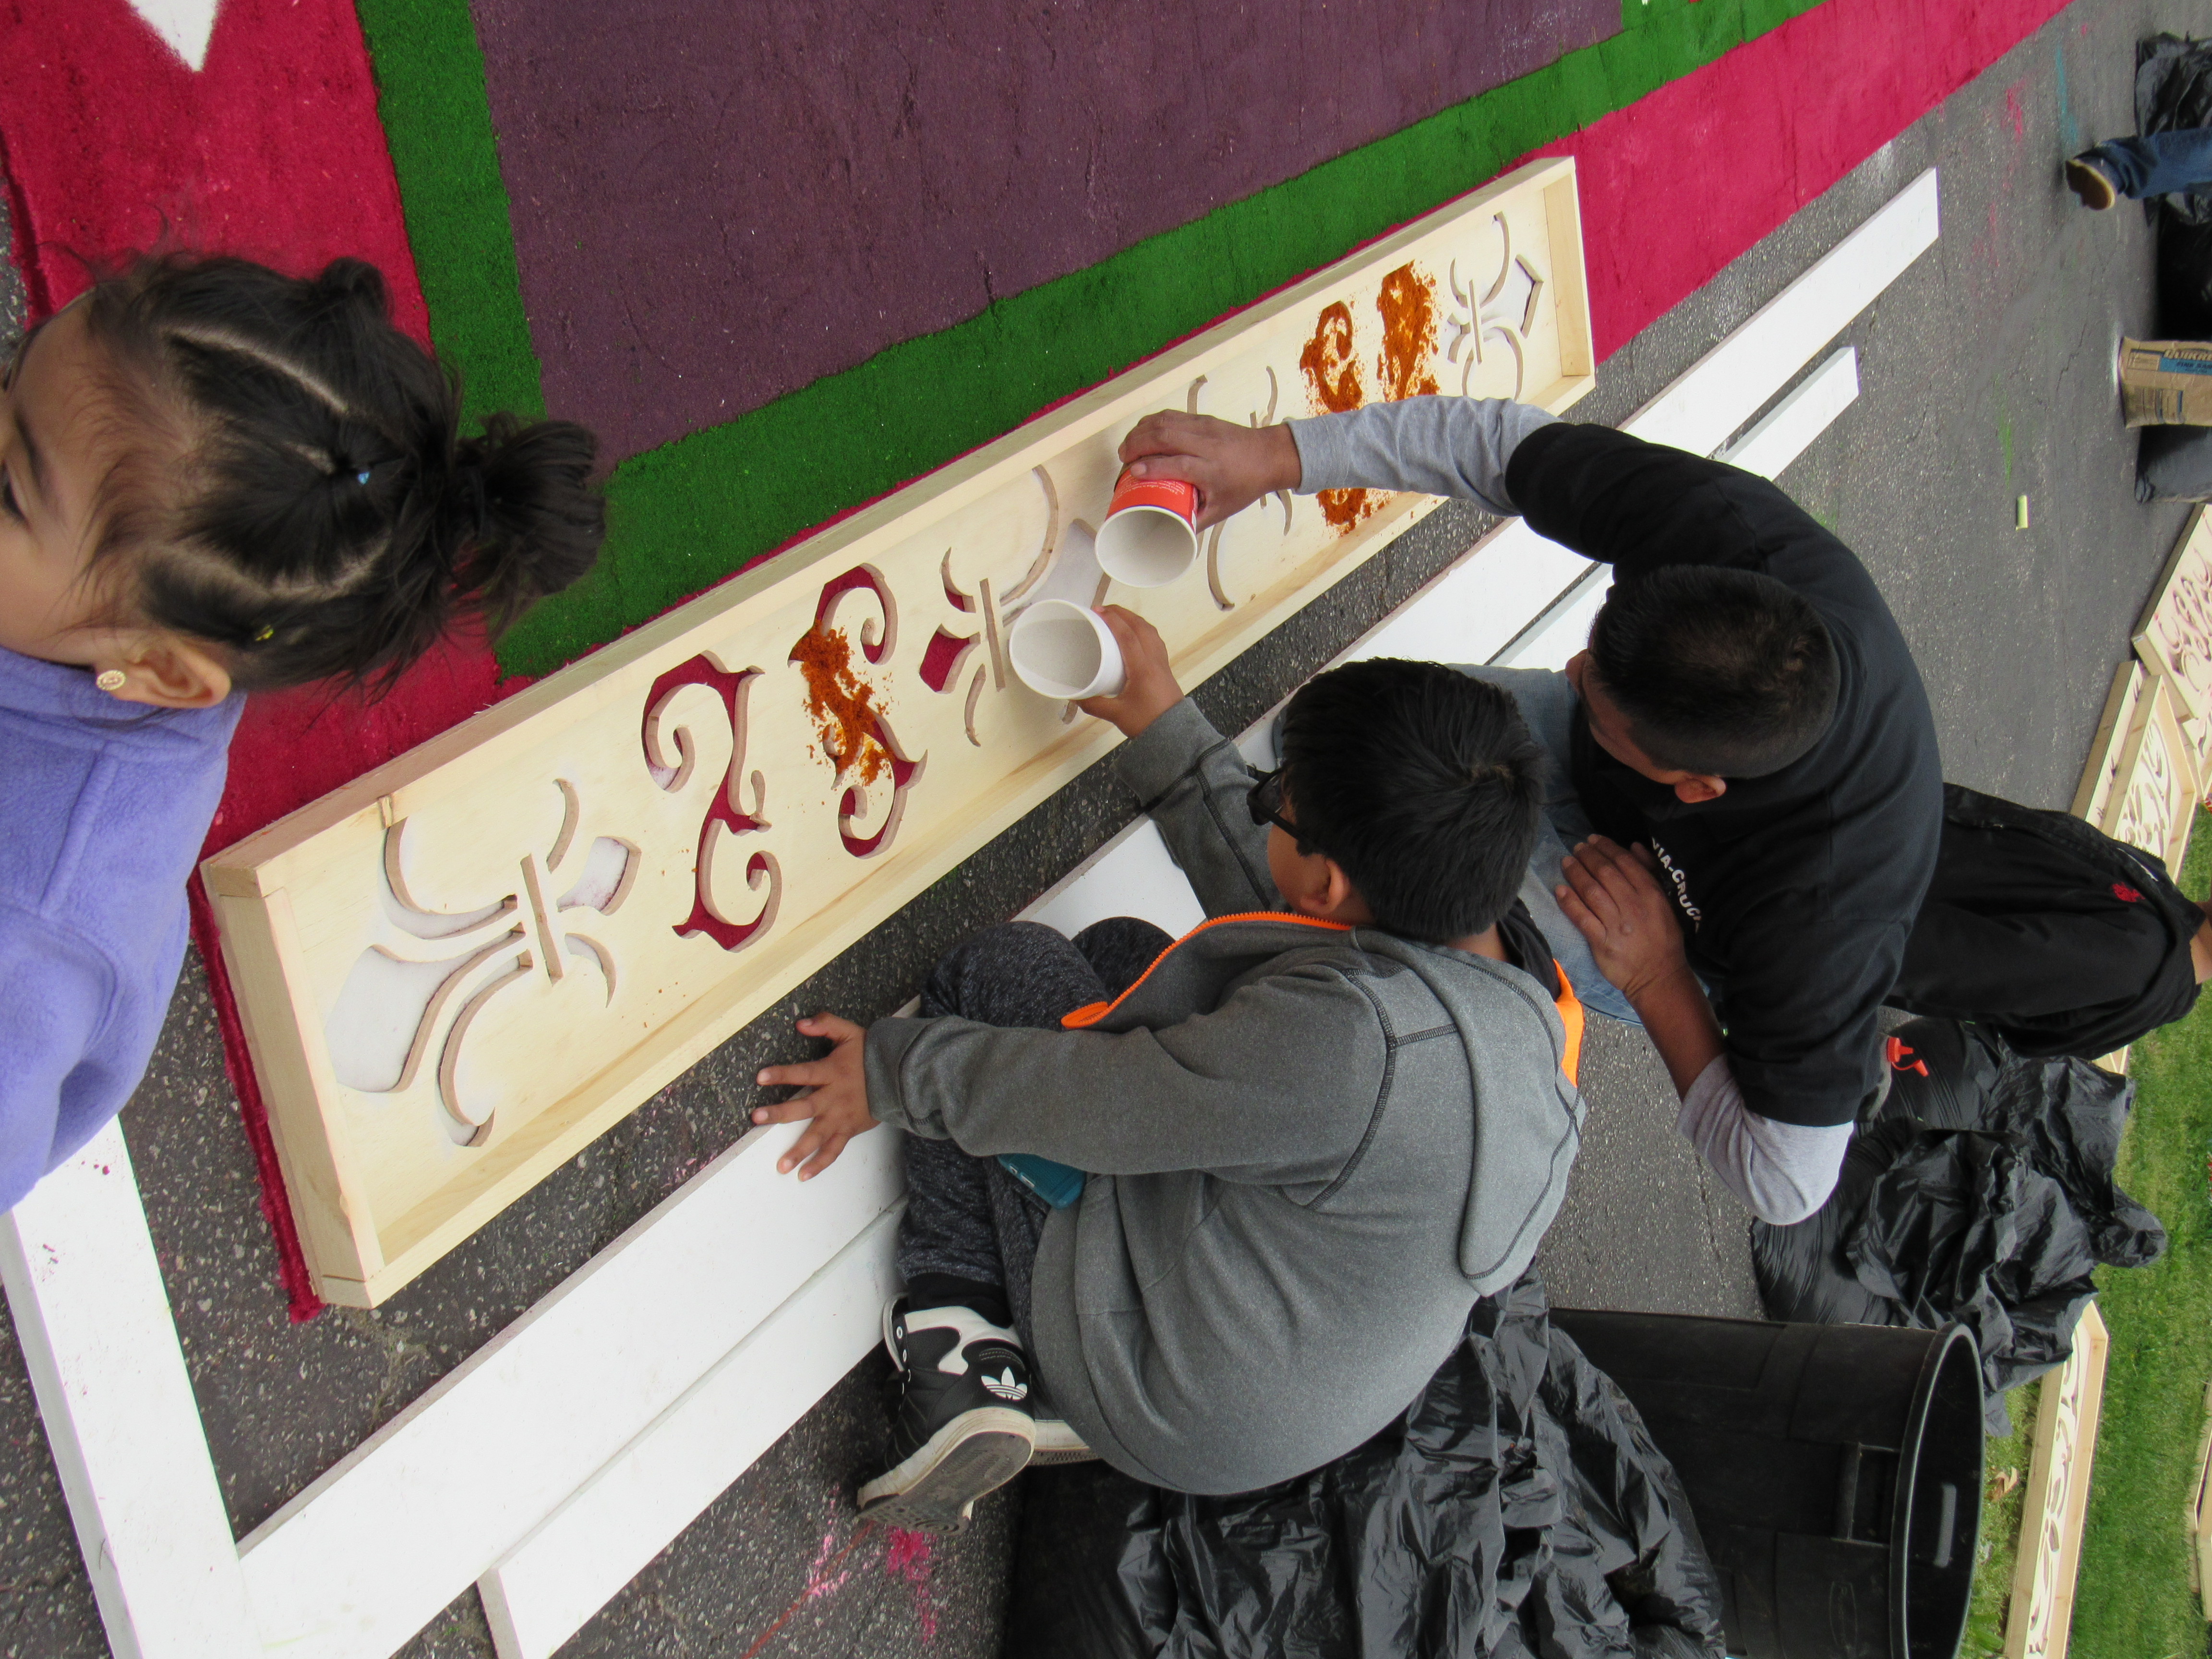 Nearing completion, workers pour sawdust into forms for the border of the carpet.